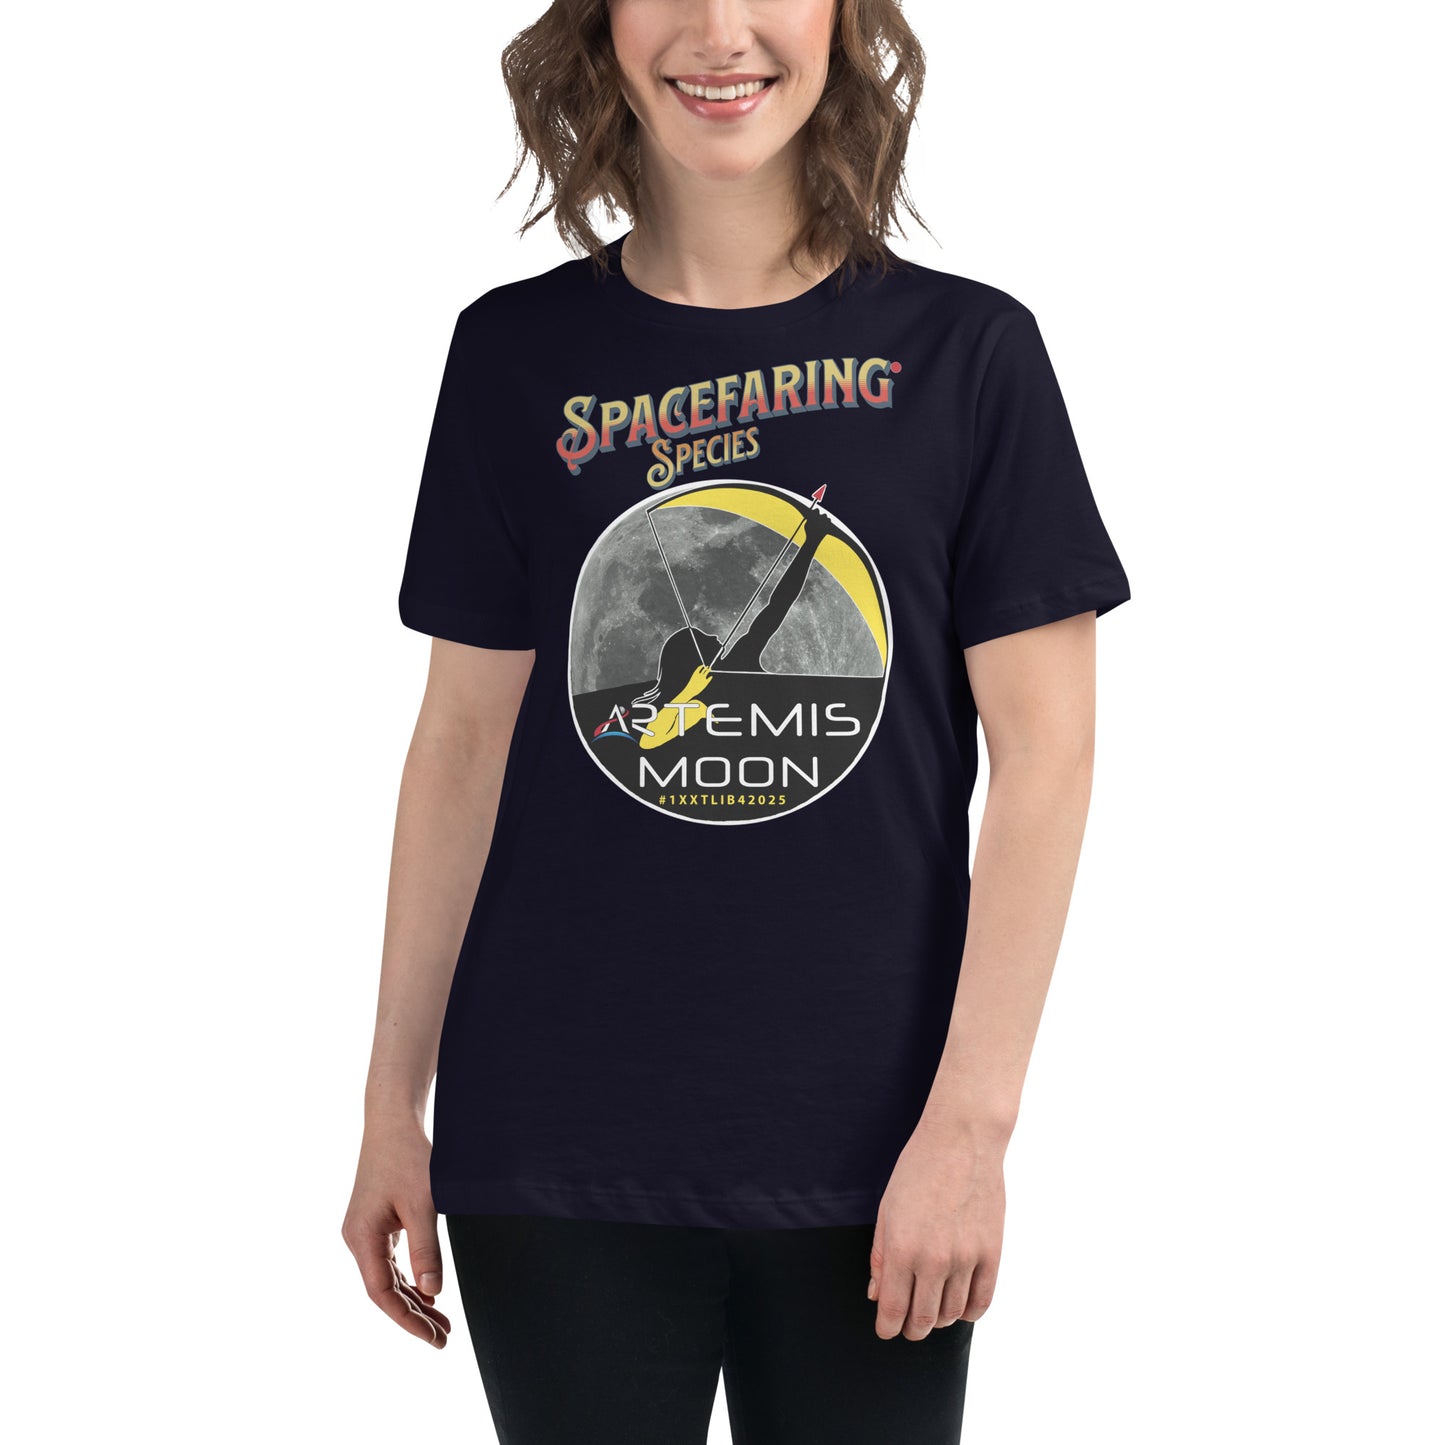 Women's Relaxed T-Shirt - A Spacefaring Species with #1XXTLIB42025